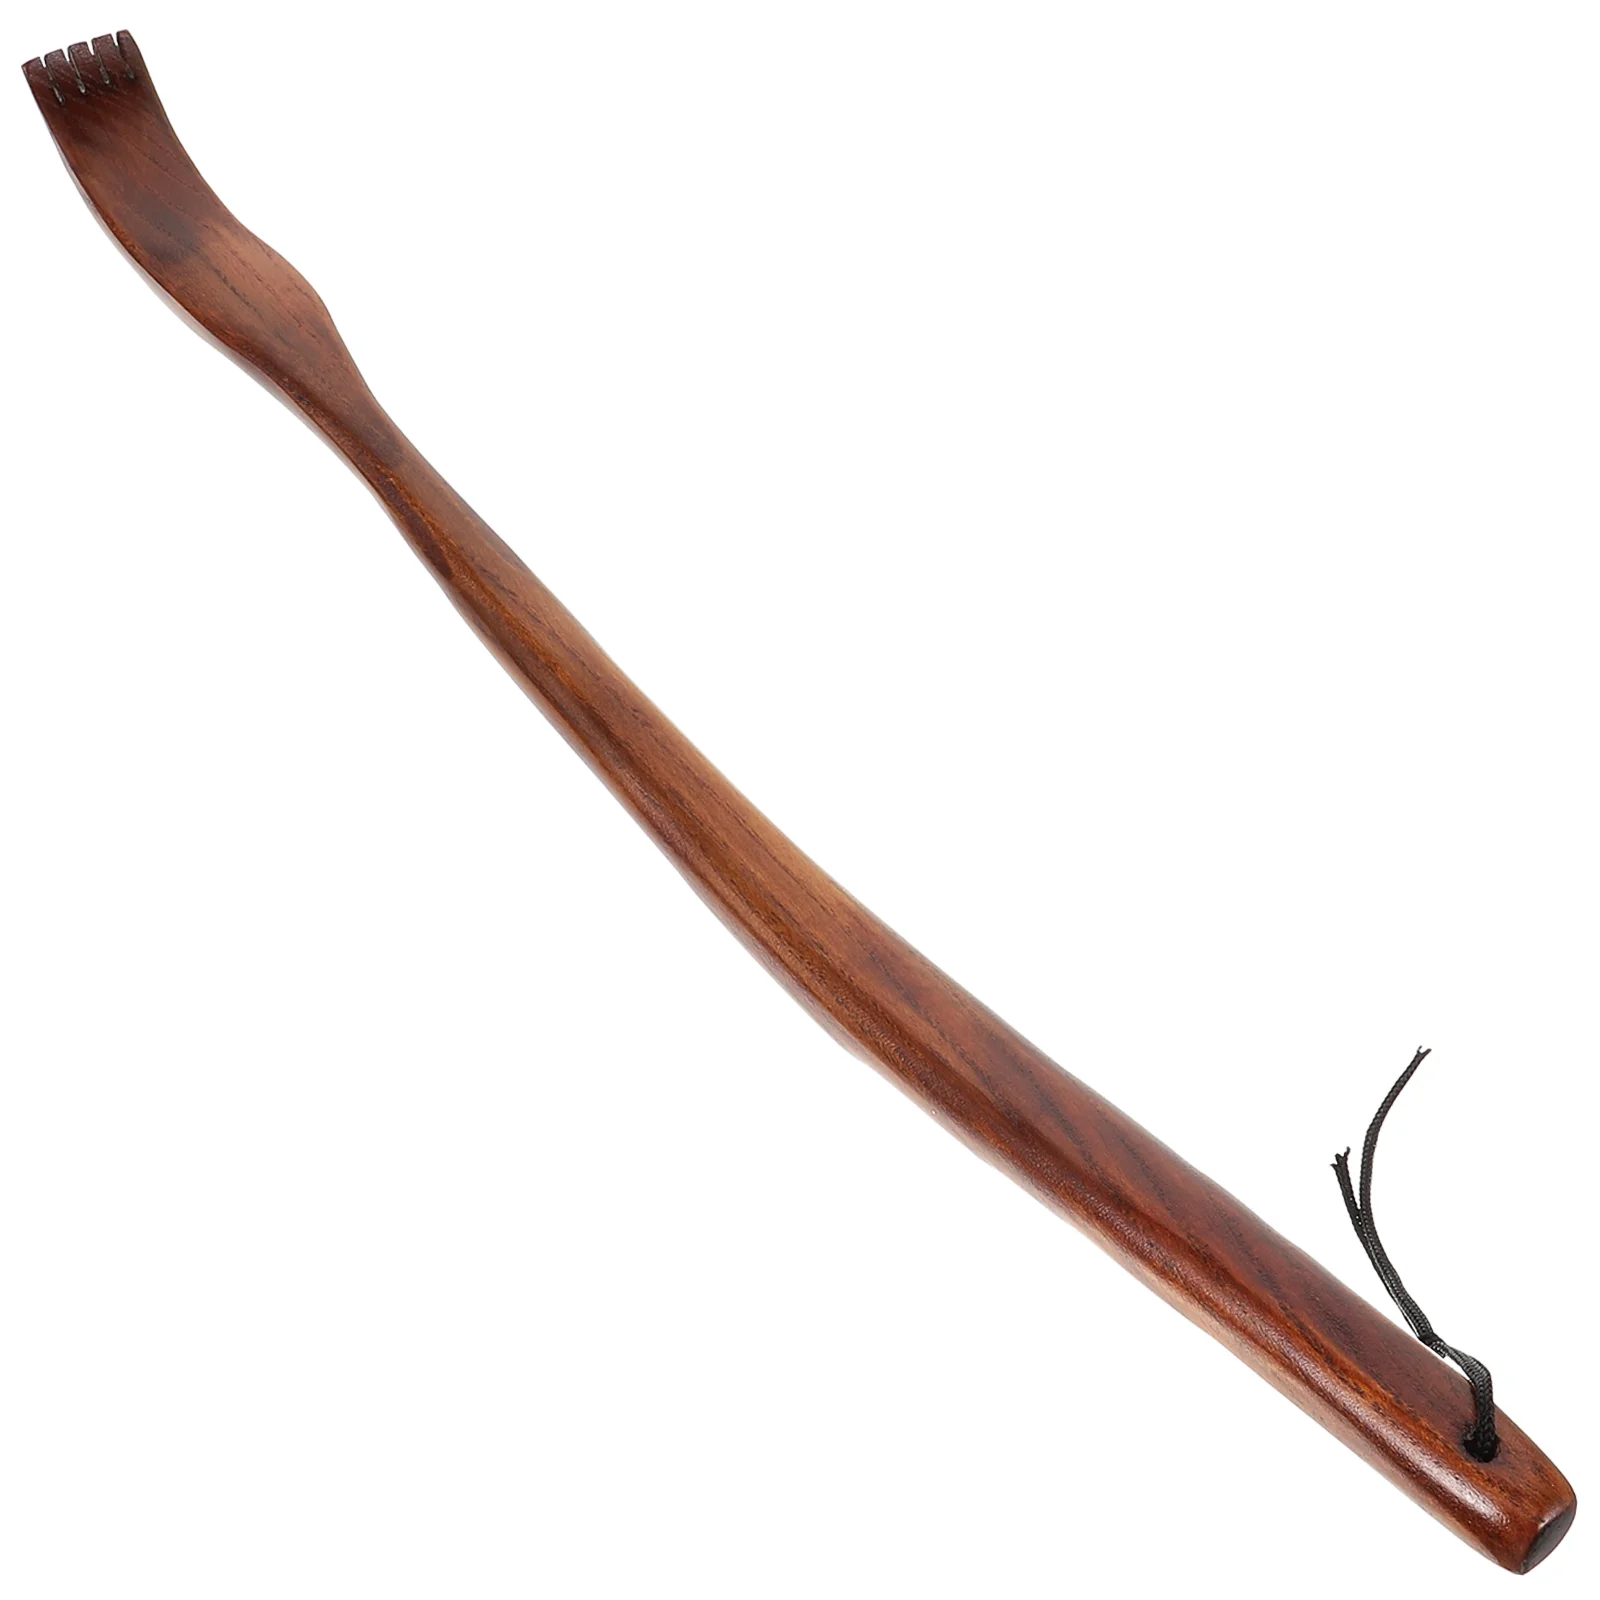 

Old Painted Curved Handle Wood Back Scratcher Long for Elderly Portable Relax Massager Tickle Tool Wooden Household